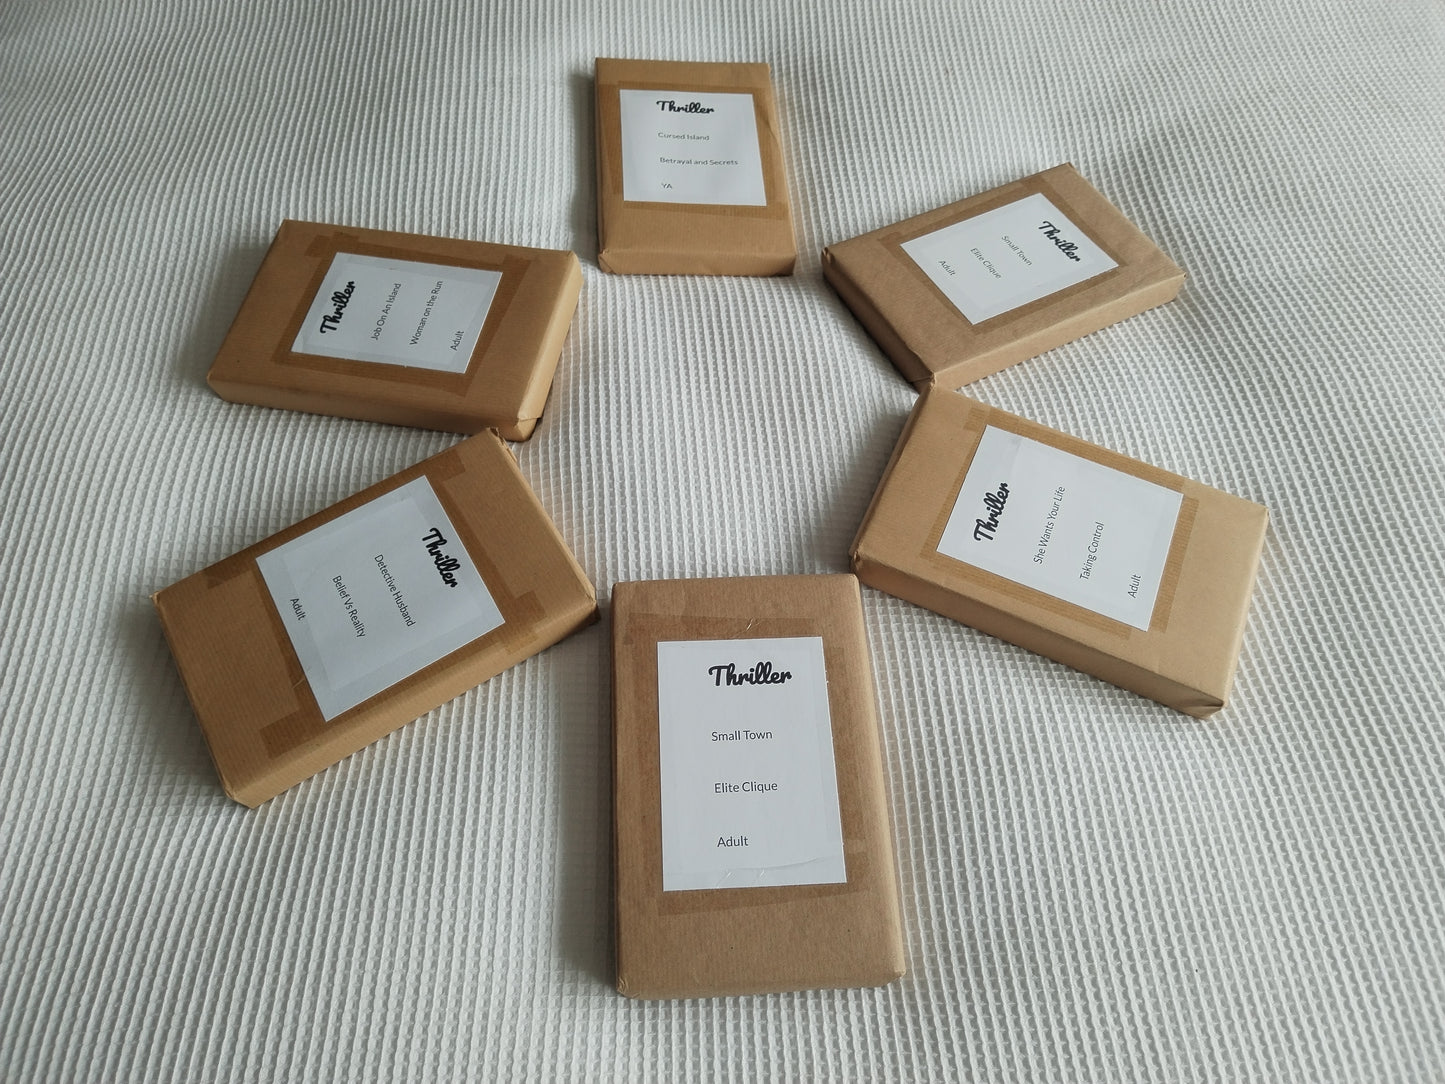 (NEW CONDITION) 5 Bookish Blind Dates